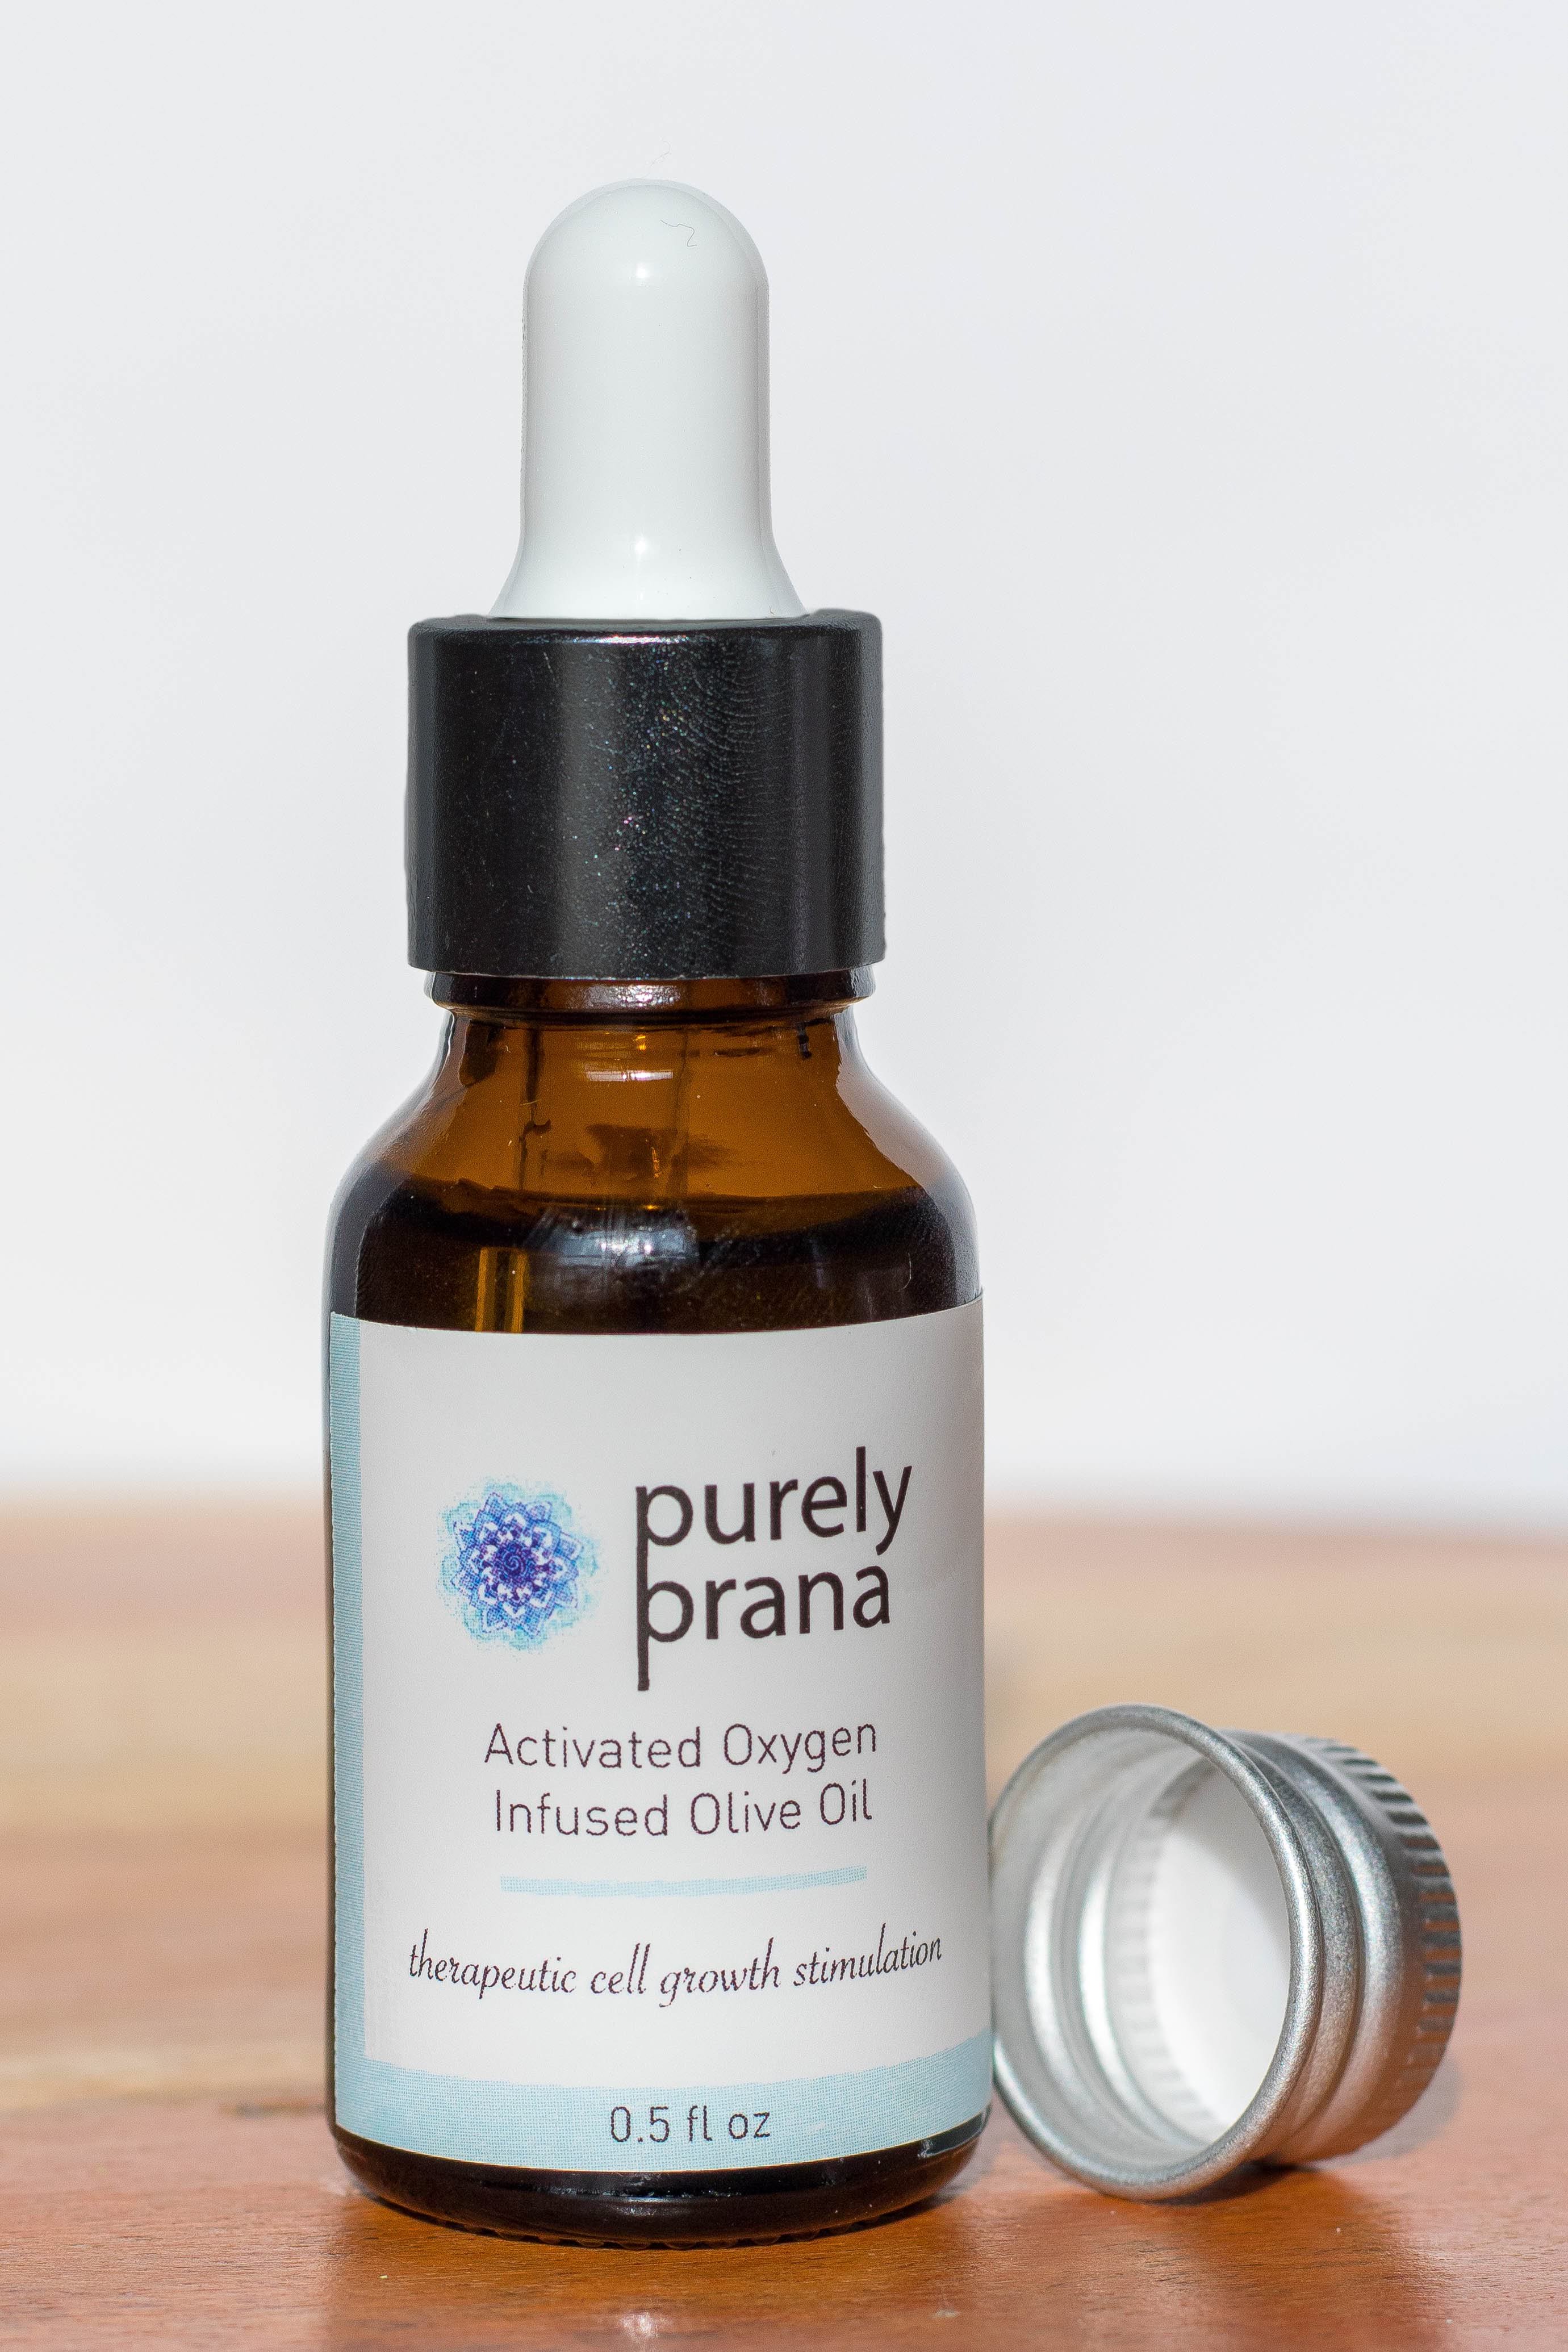 Activated Oxygen infused Olive Oil, purely prana oil, olive oil, organic oil, organic skincare products